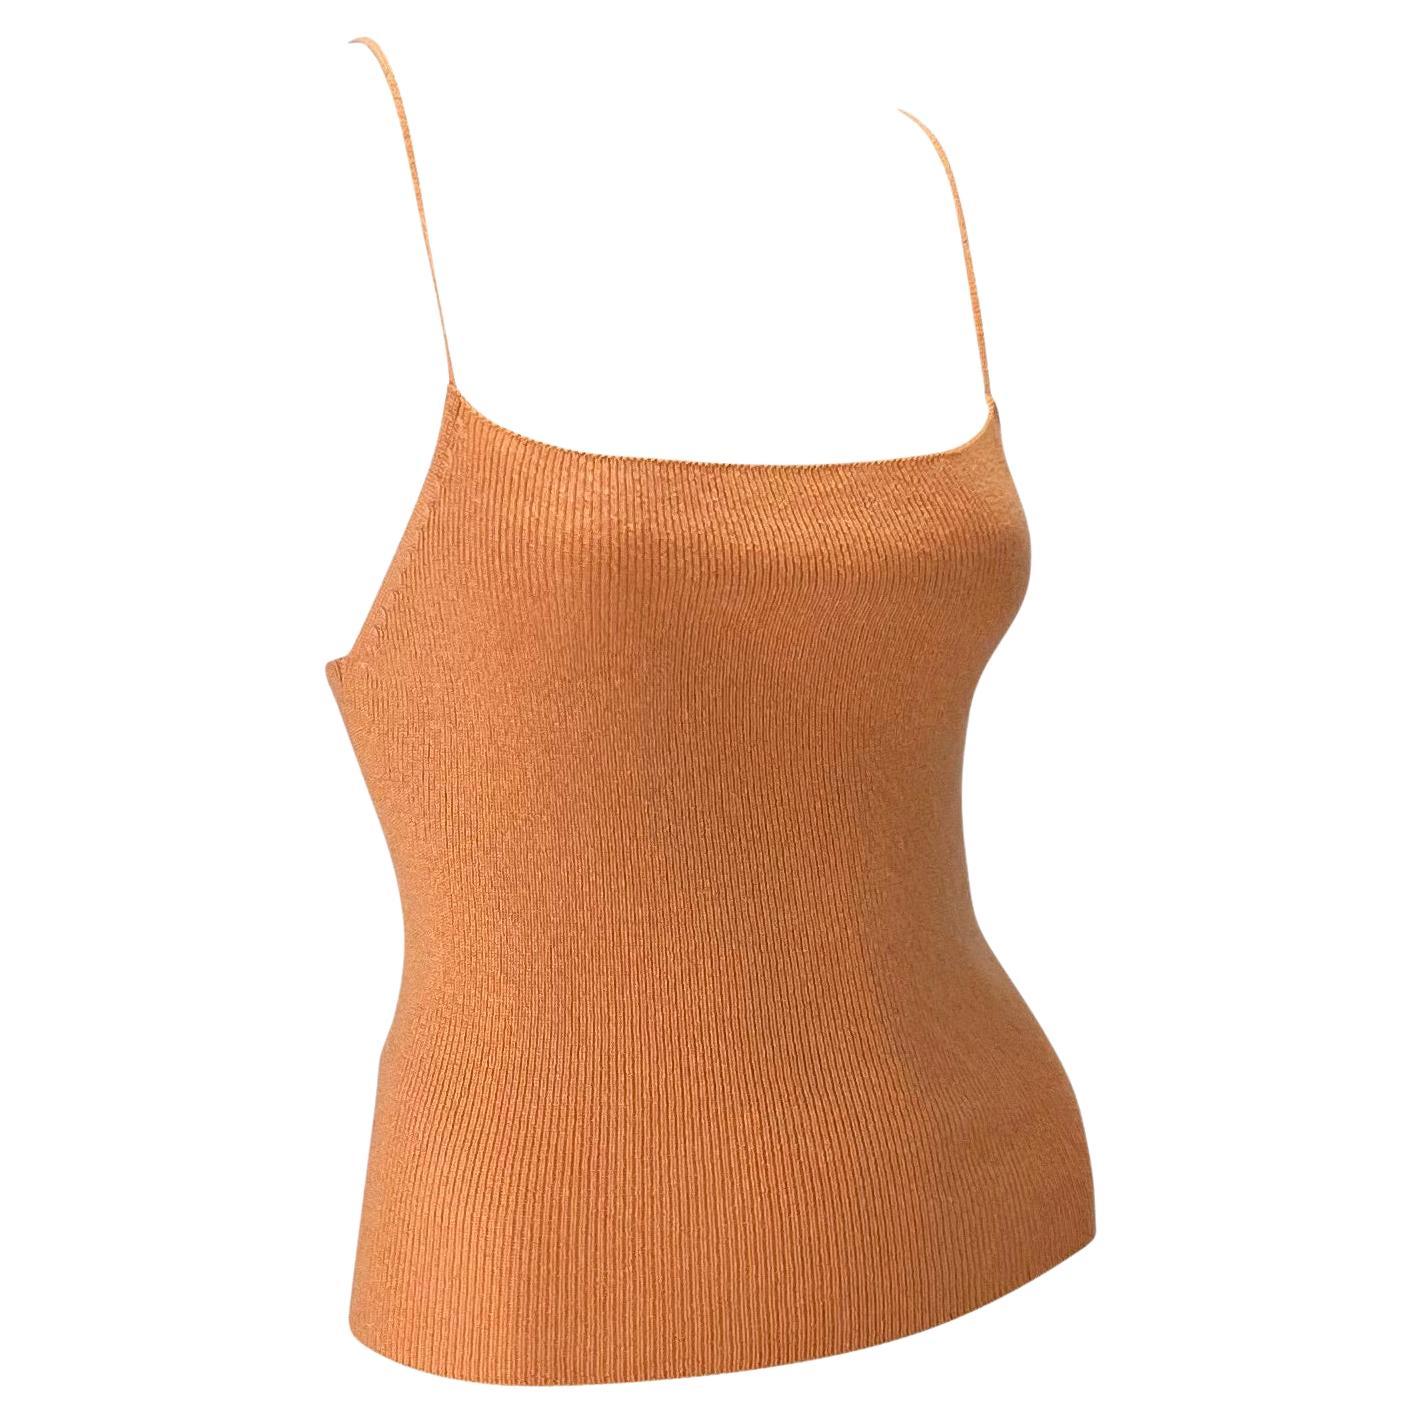 Mid 1990s Gucci by Tom Ford Peach Knit Lace Up Sweater Tank Top For Sale 2